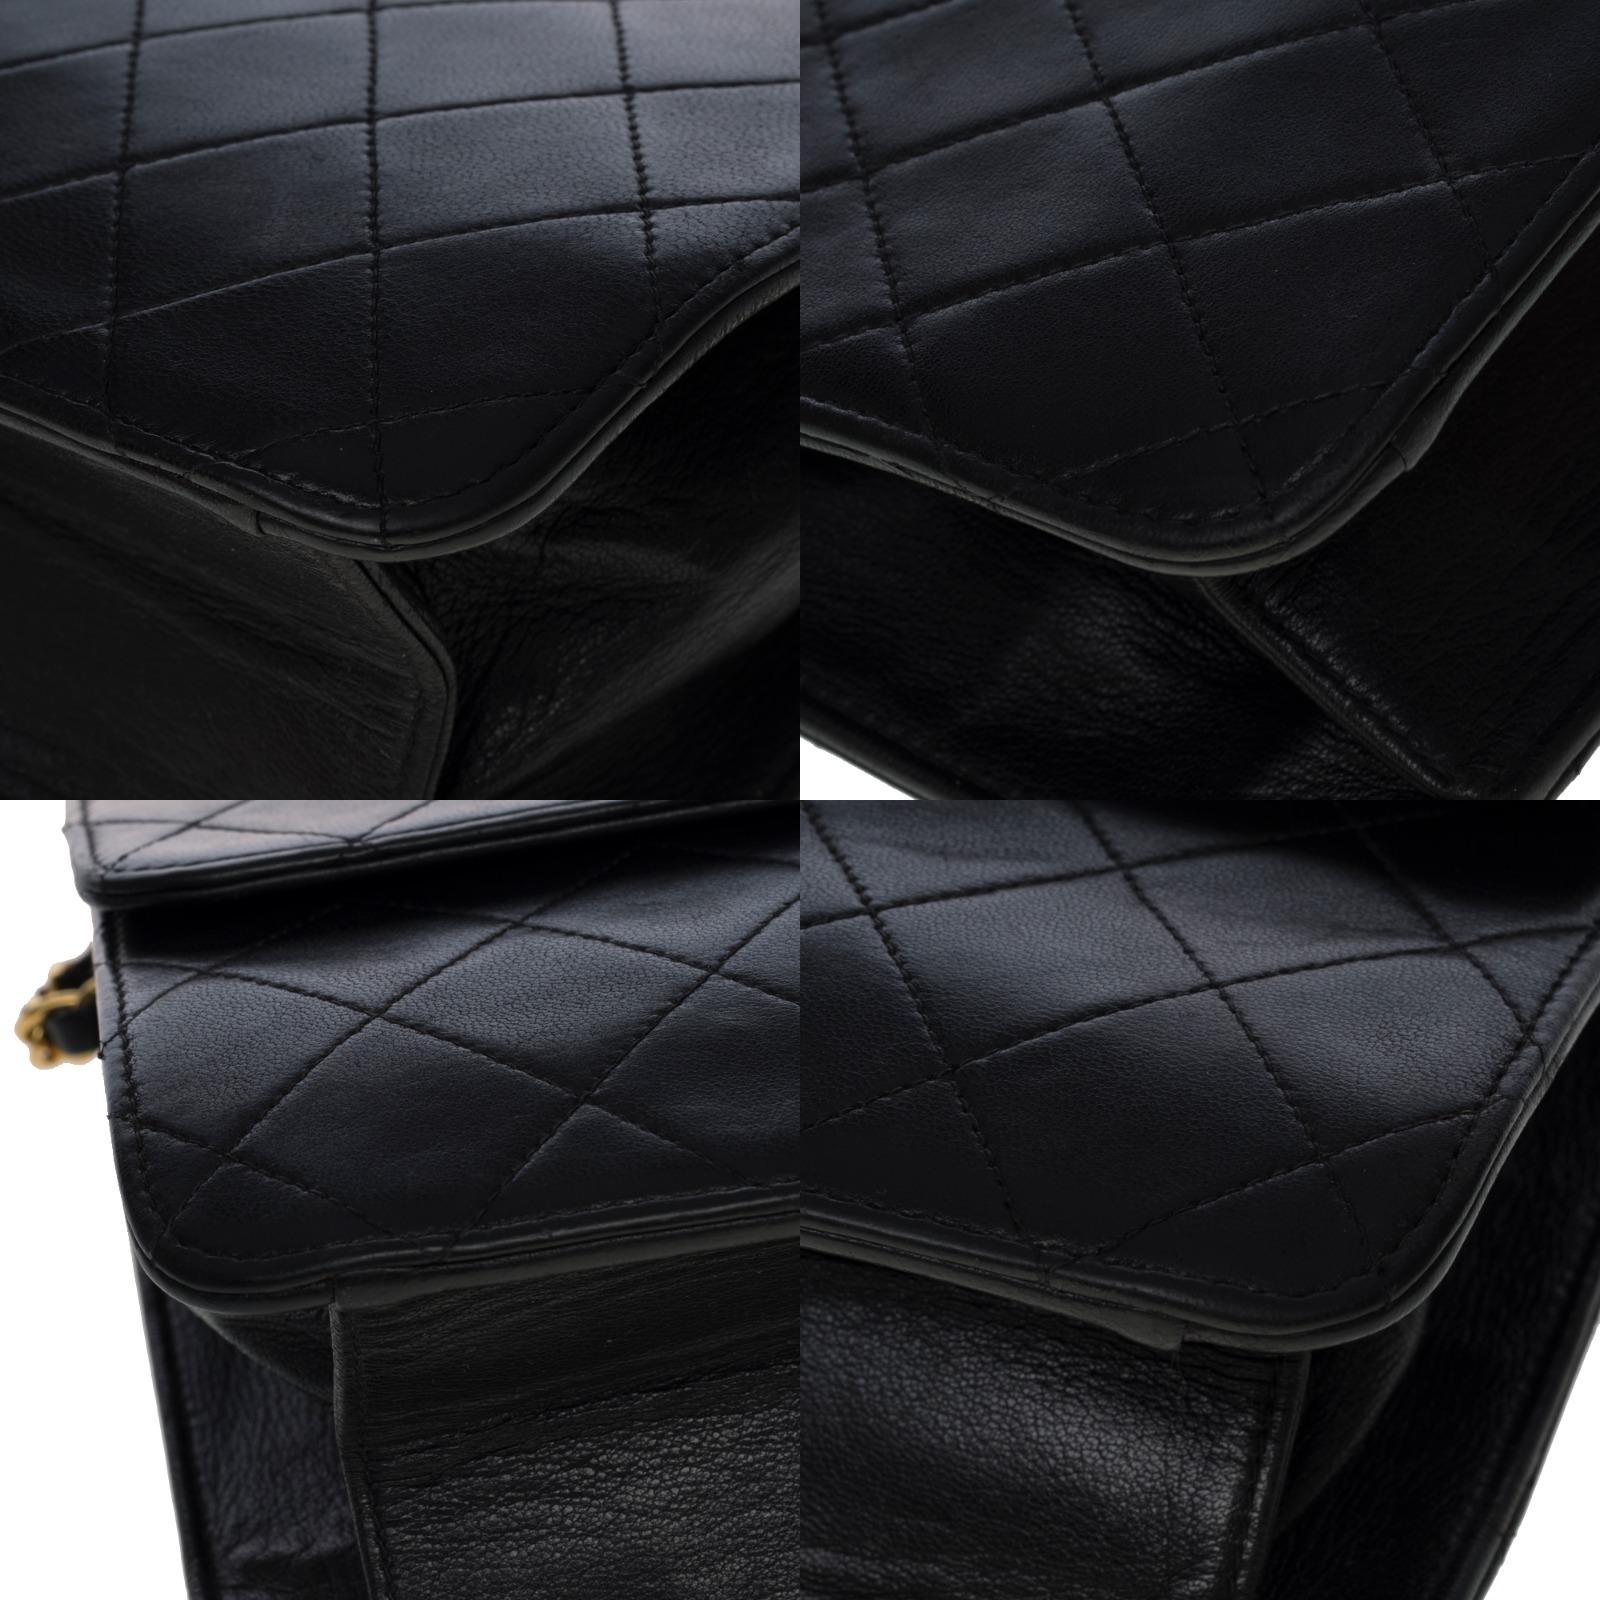 Chanel Classique flap bag bag in black quilted leather, GHW For Sale 4